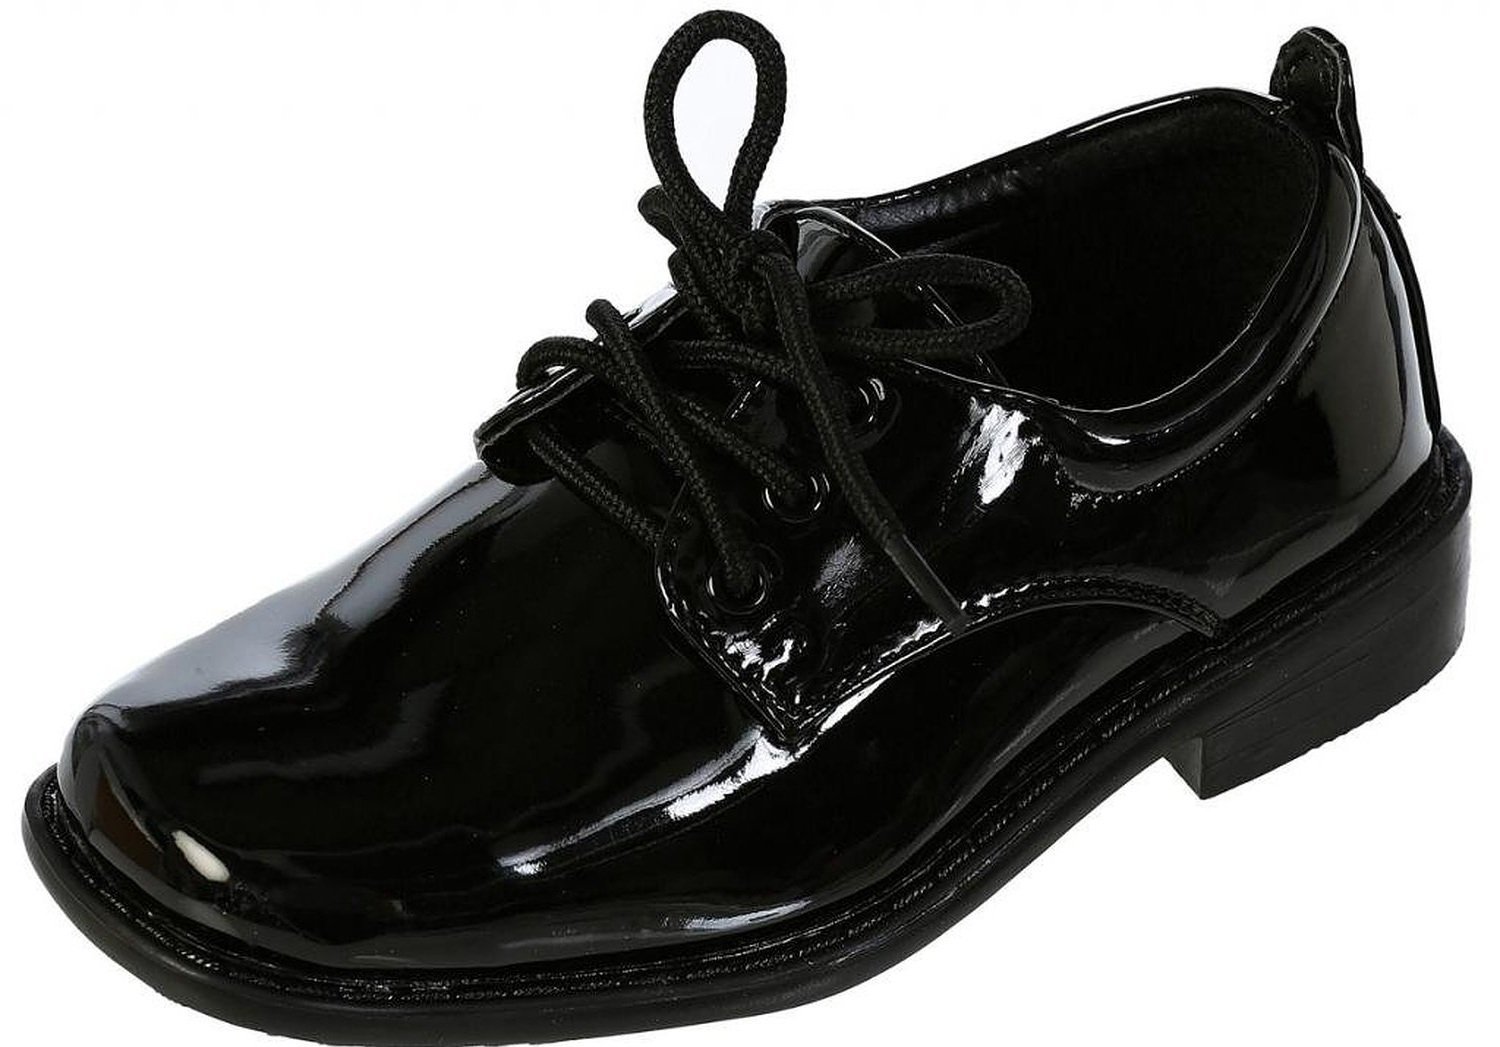 Boys Square Toe Lace Up Oxford Patent Dress Shoes - Available in Black 9 Toddler